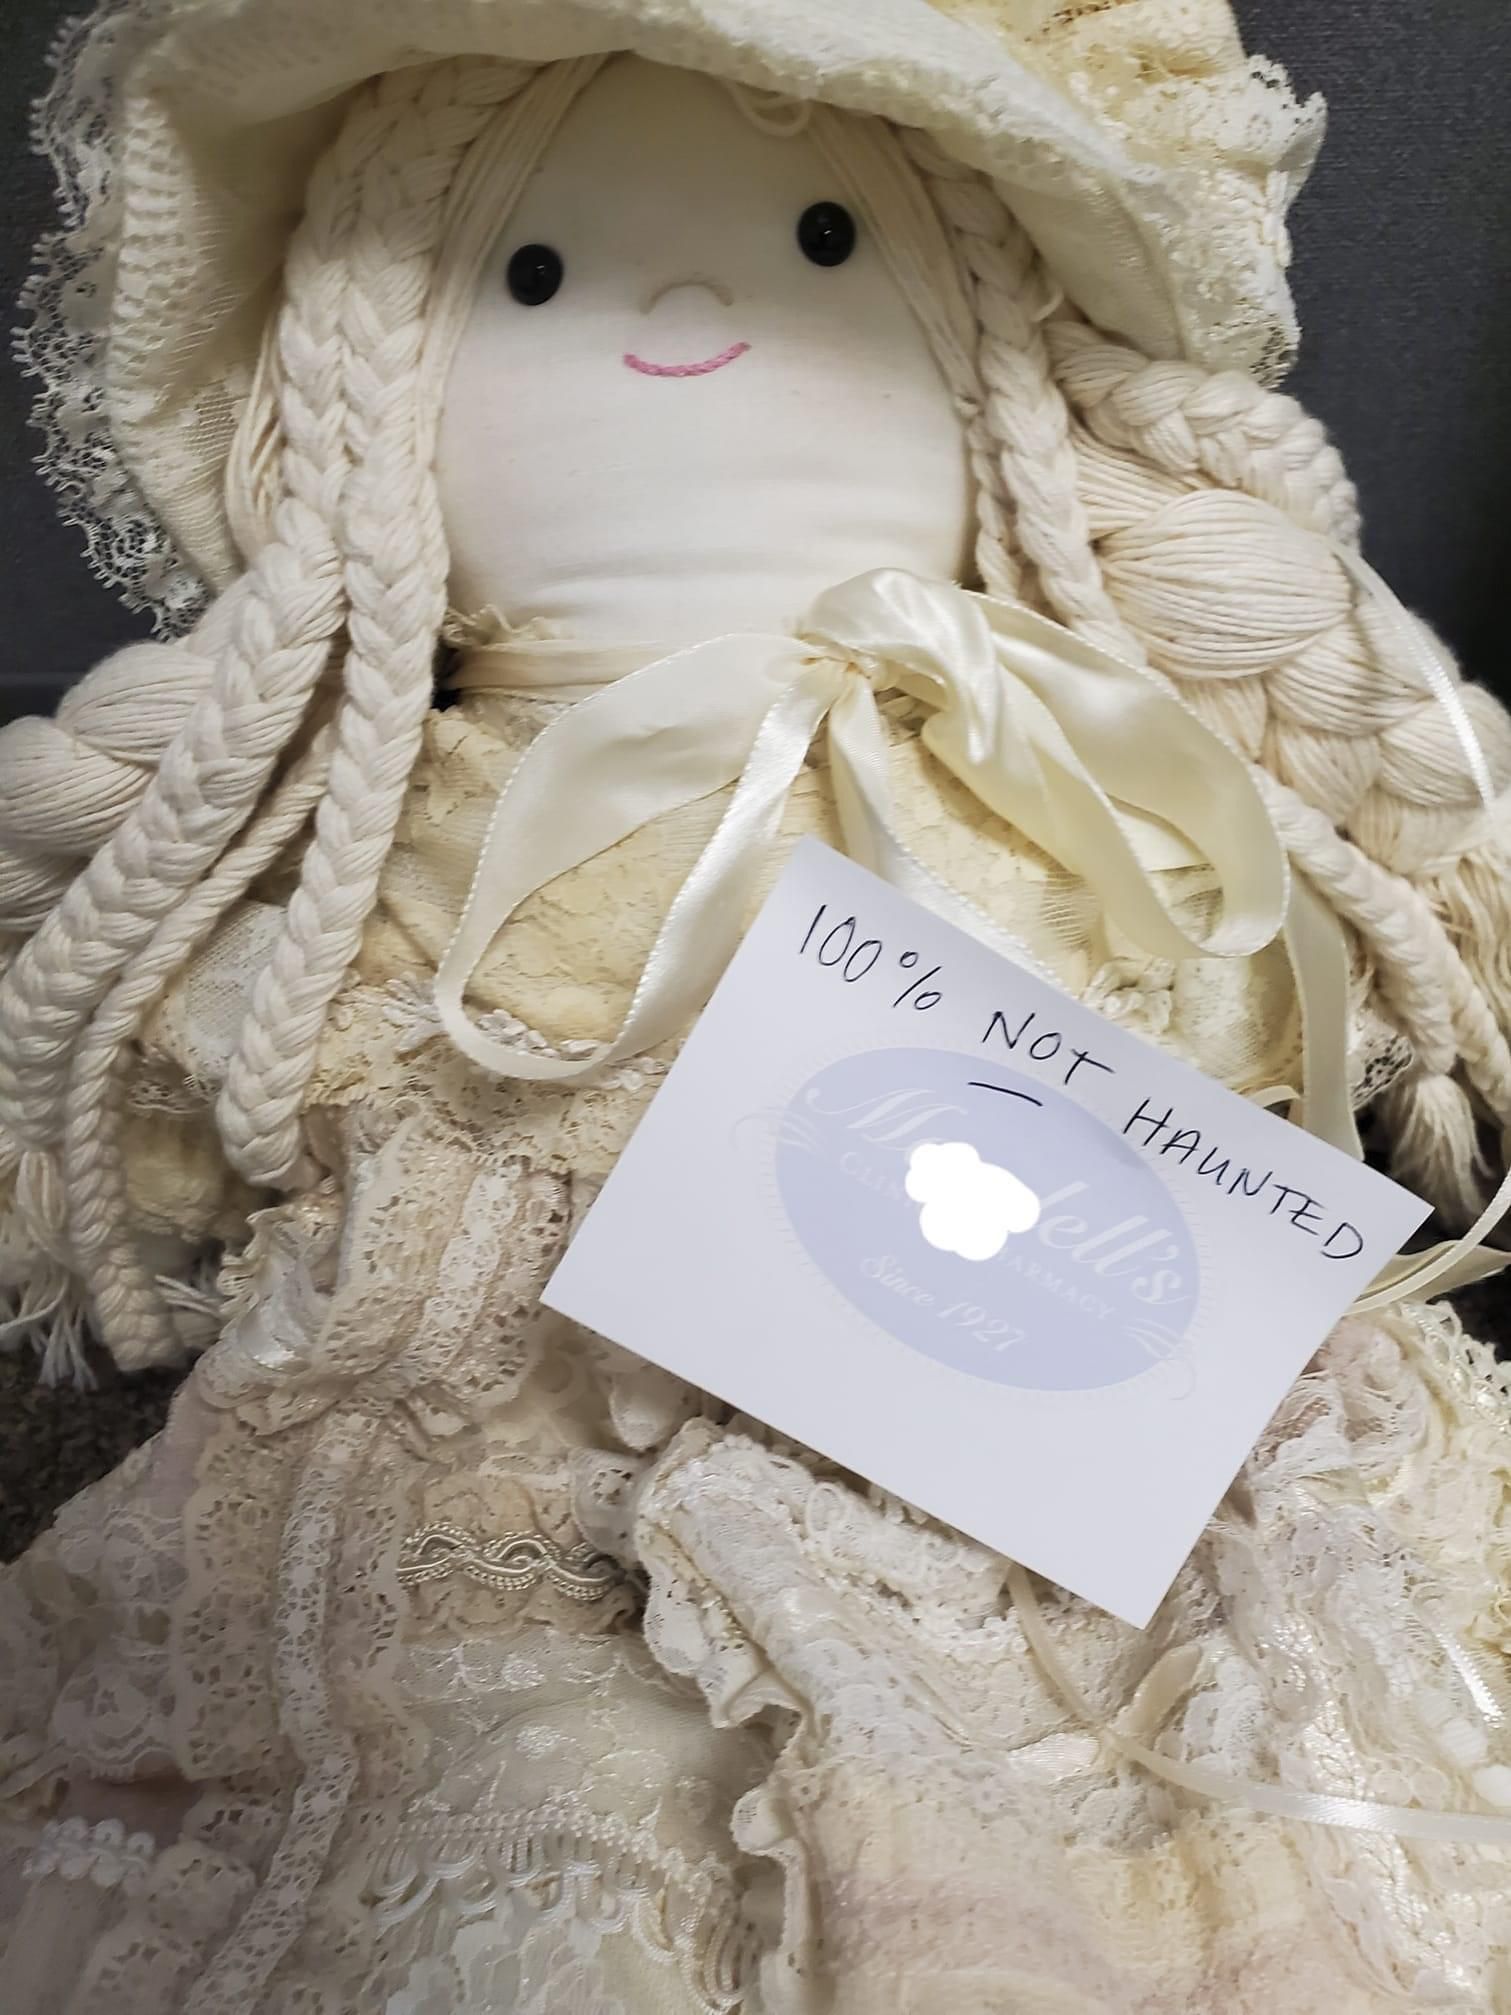 “This handmade doll was donated to a silent auction I'm working on.”